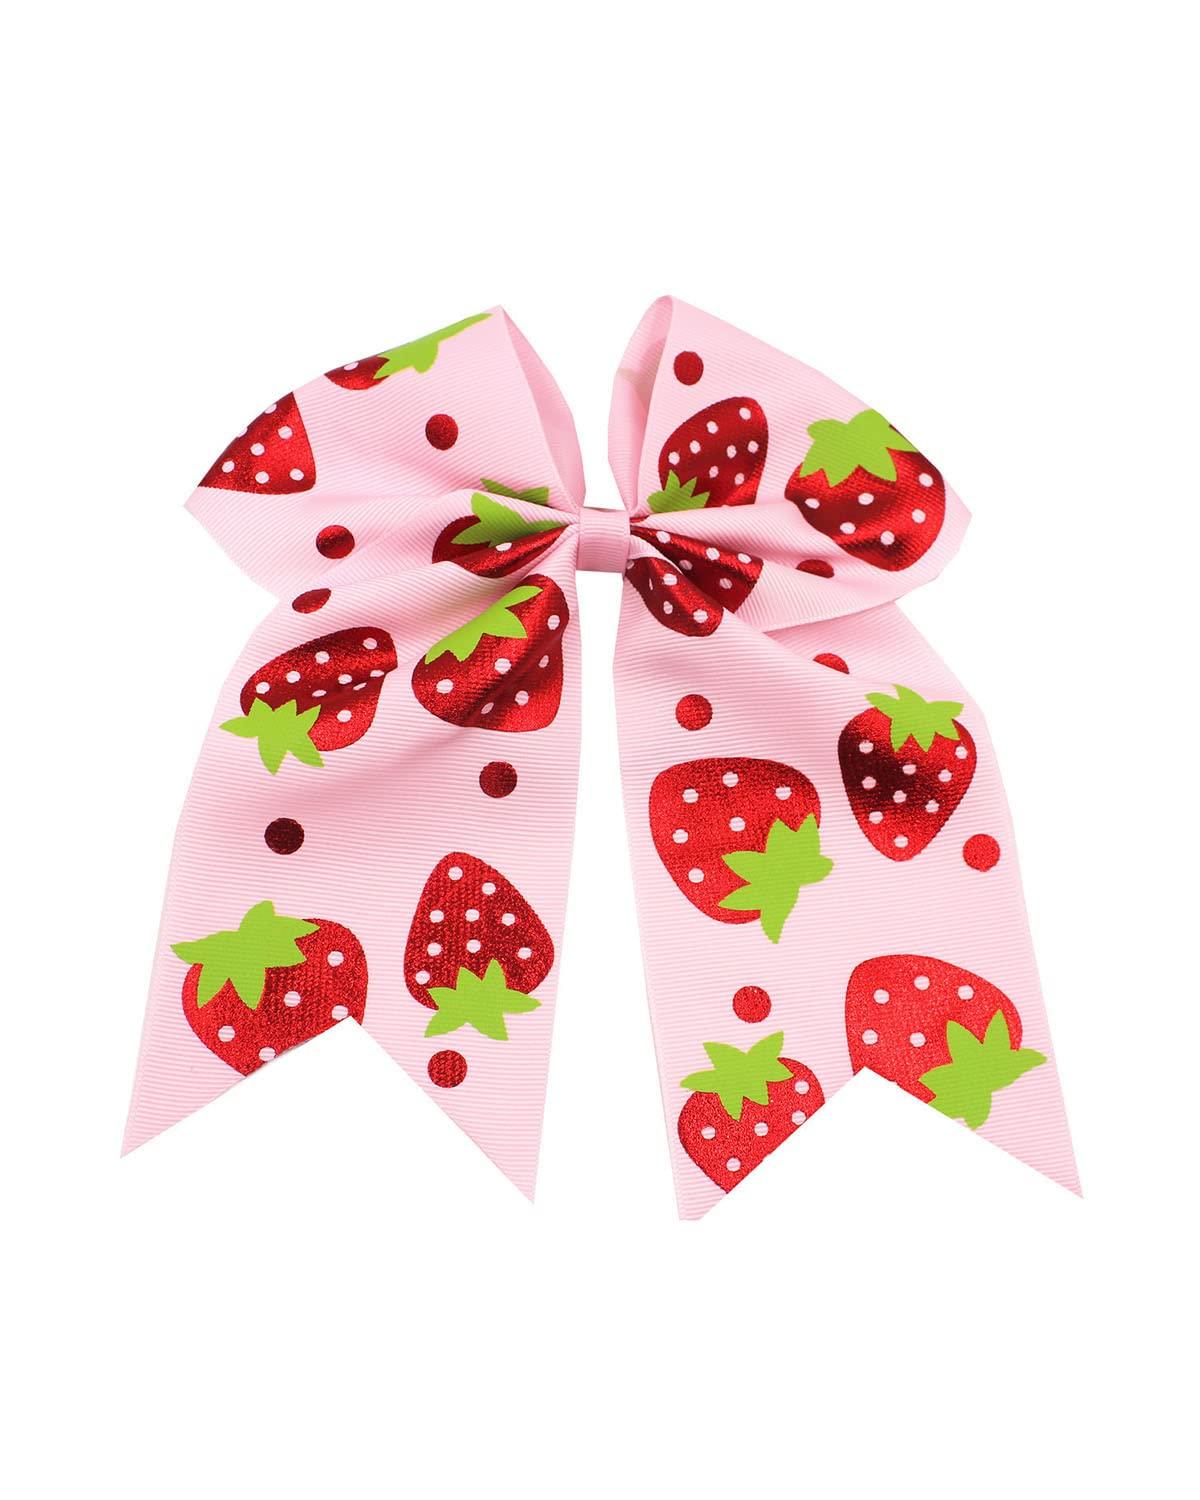 Pink Tea: More Strawberries and Barrettes